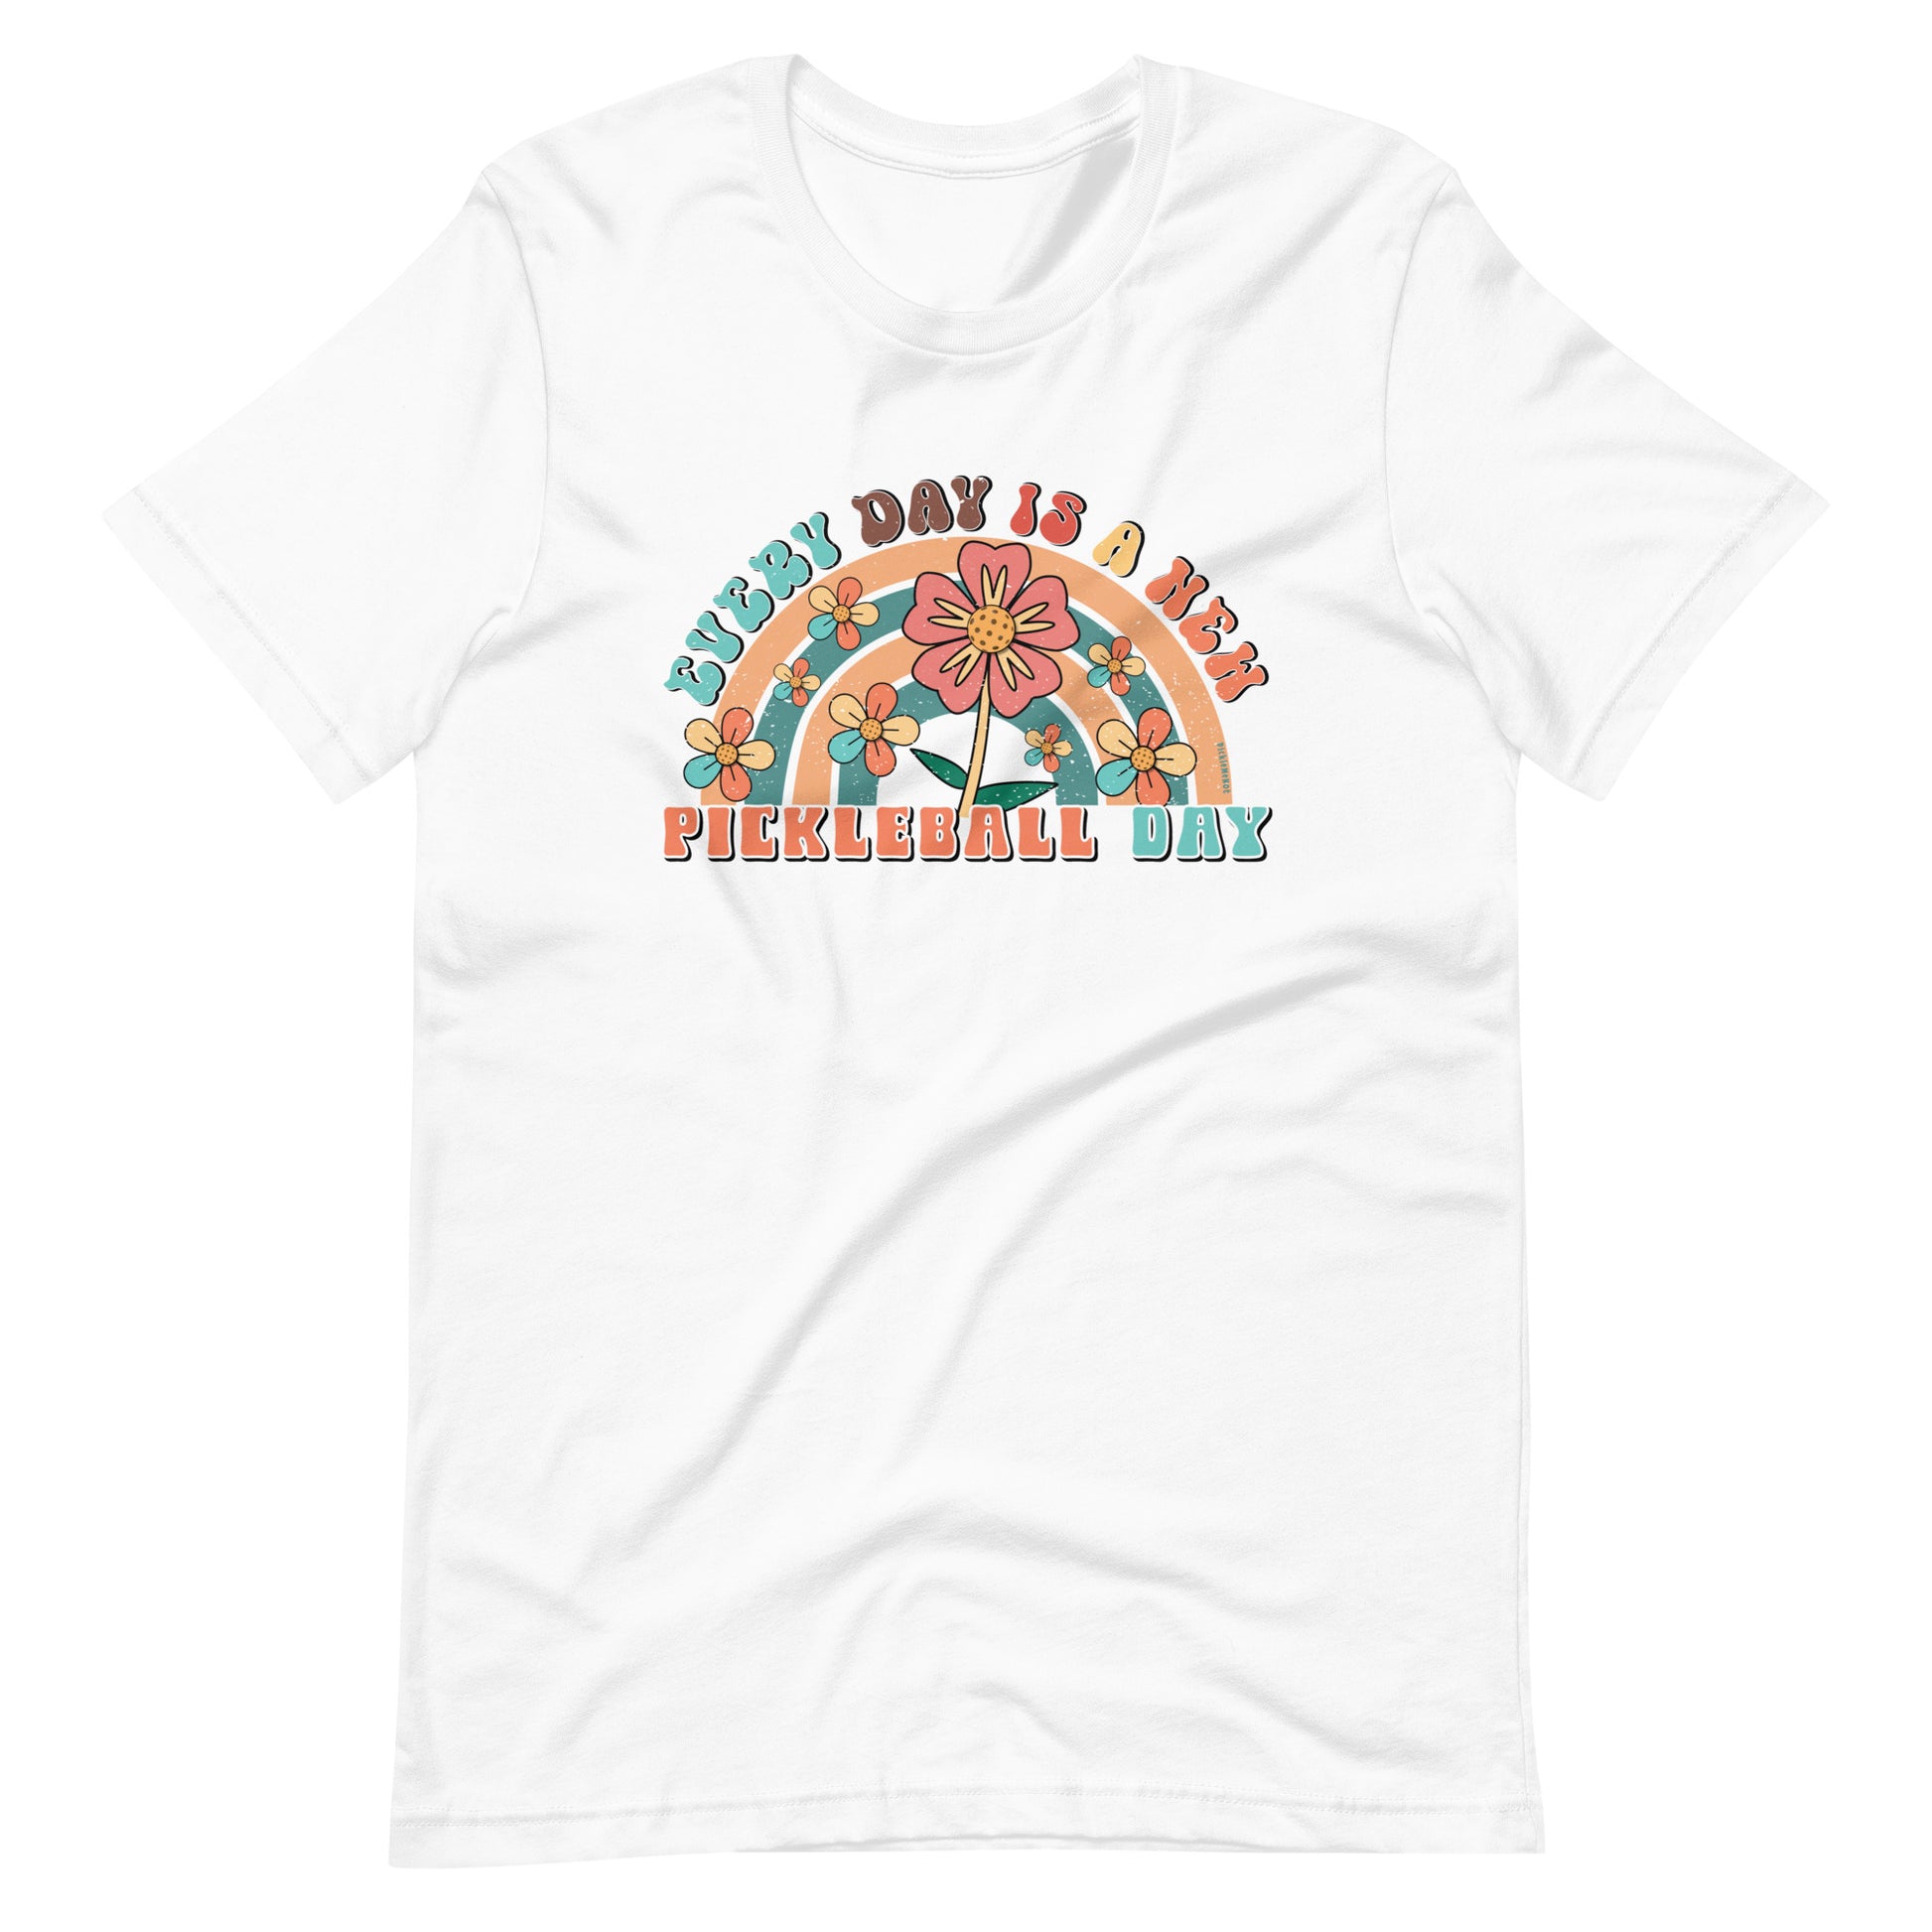 Fun Pickleball Rainbow Graphic: "Every Day Is A New Pickleball Day," Womens Unisex  White T-Shirt